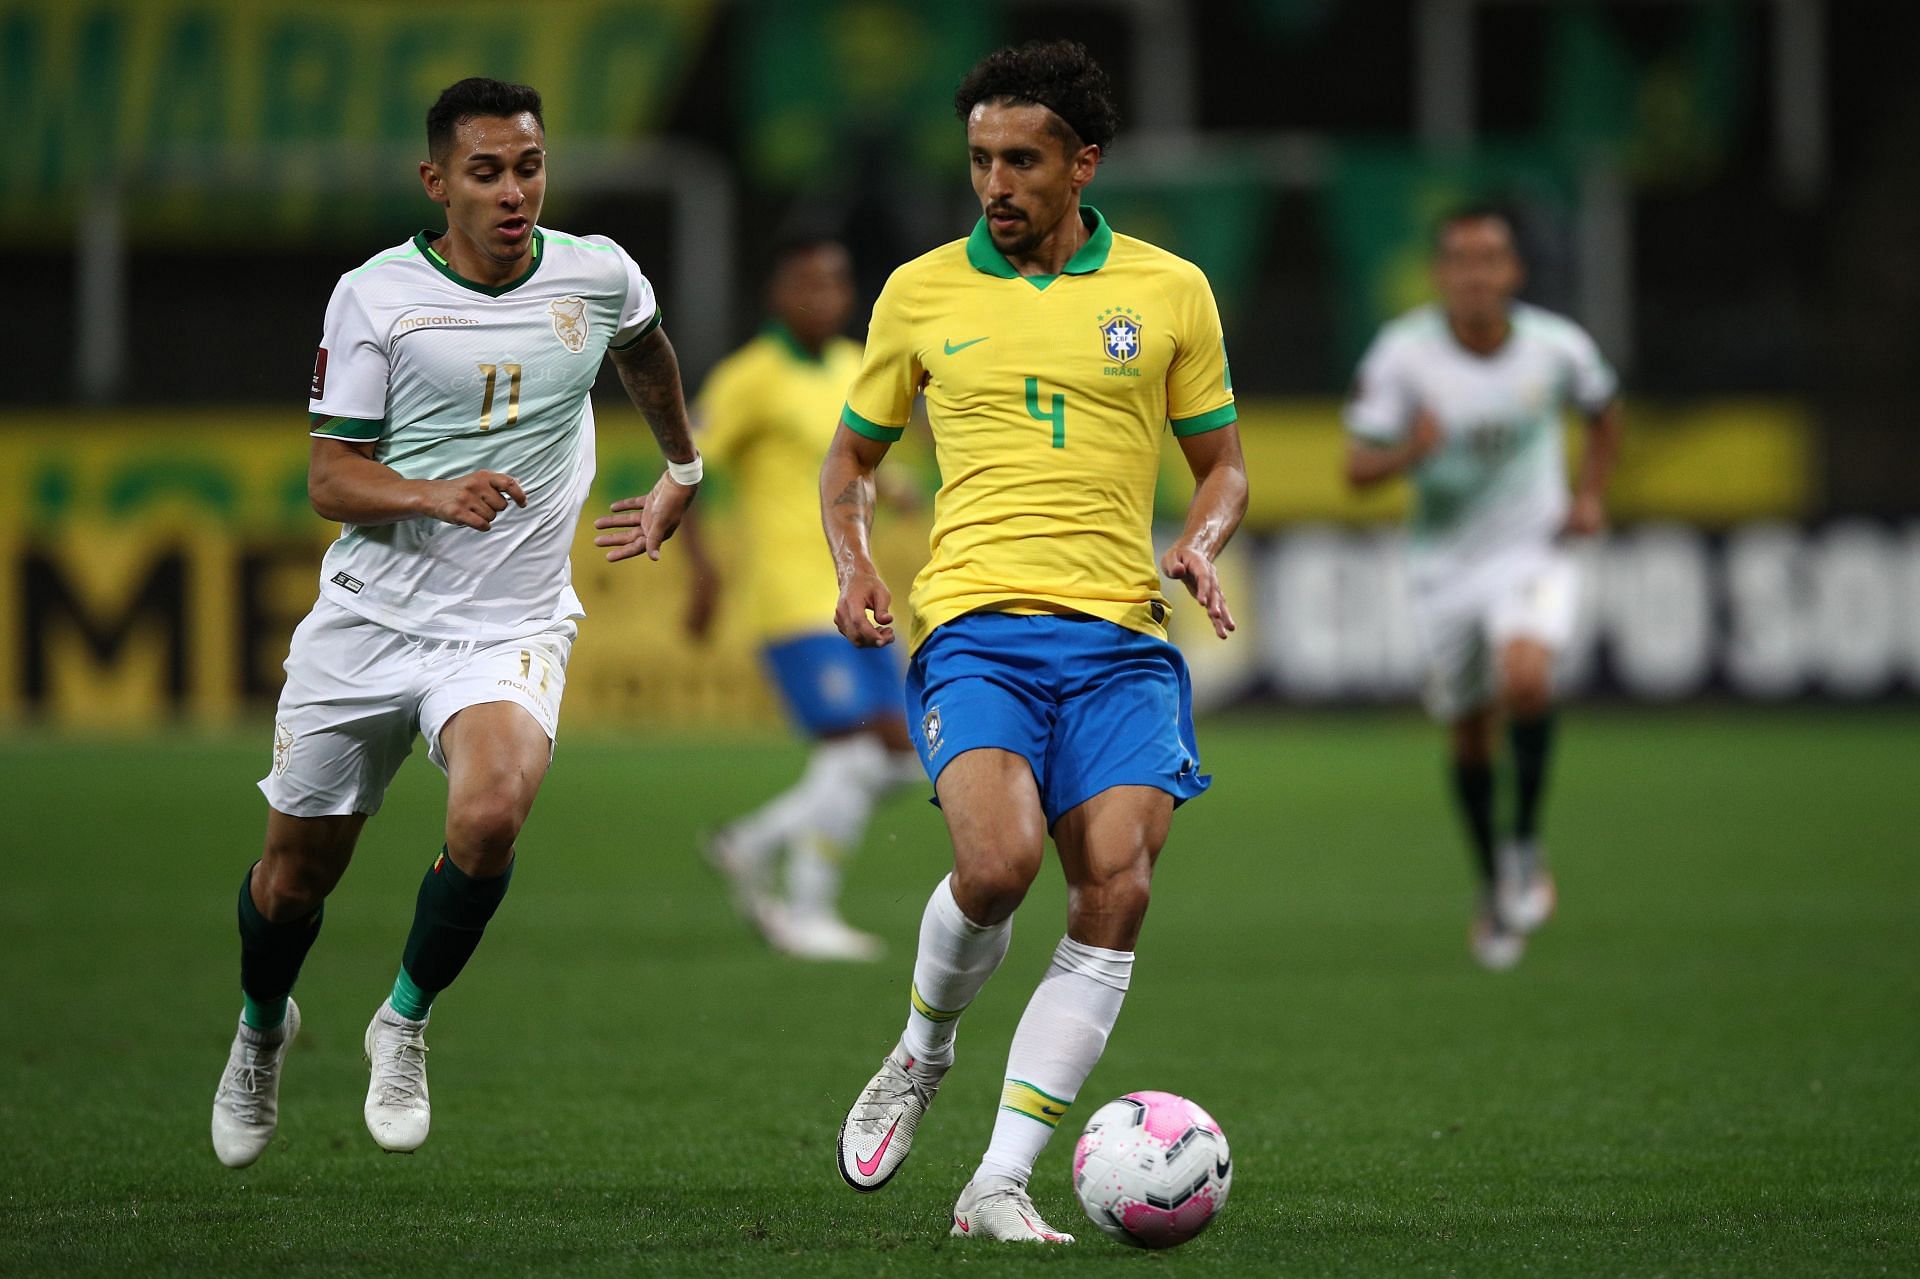 Picuiense PB Fixtures, Predictions, Schedule and Live Results Football  Brazil